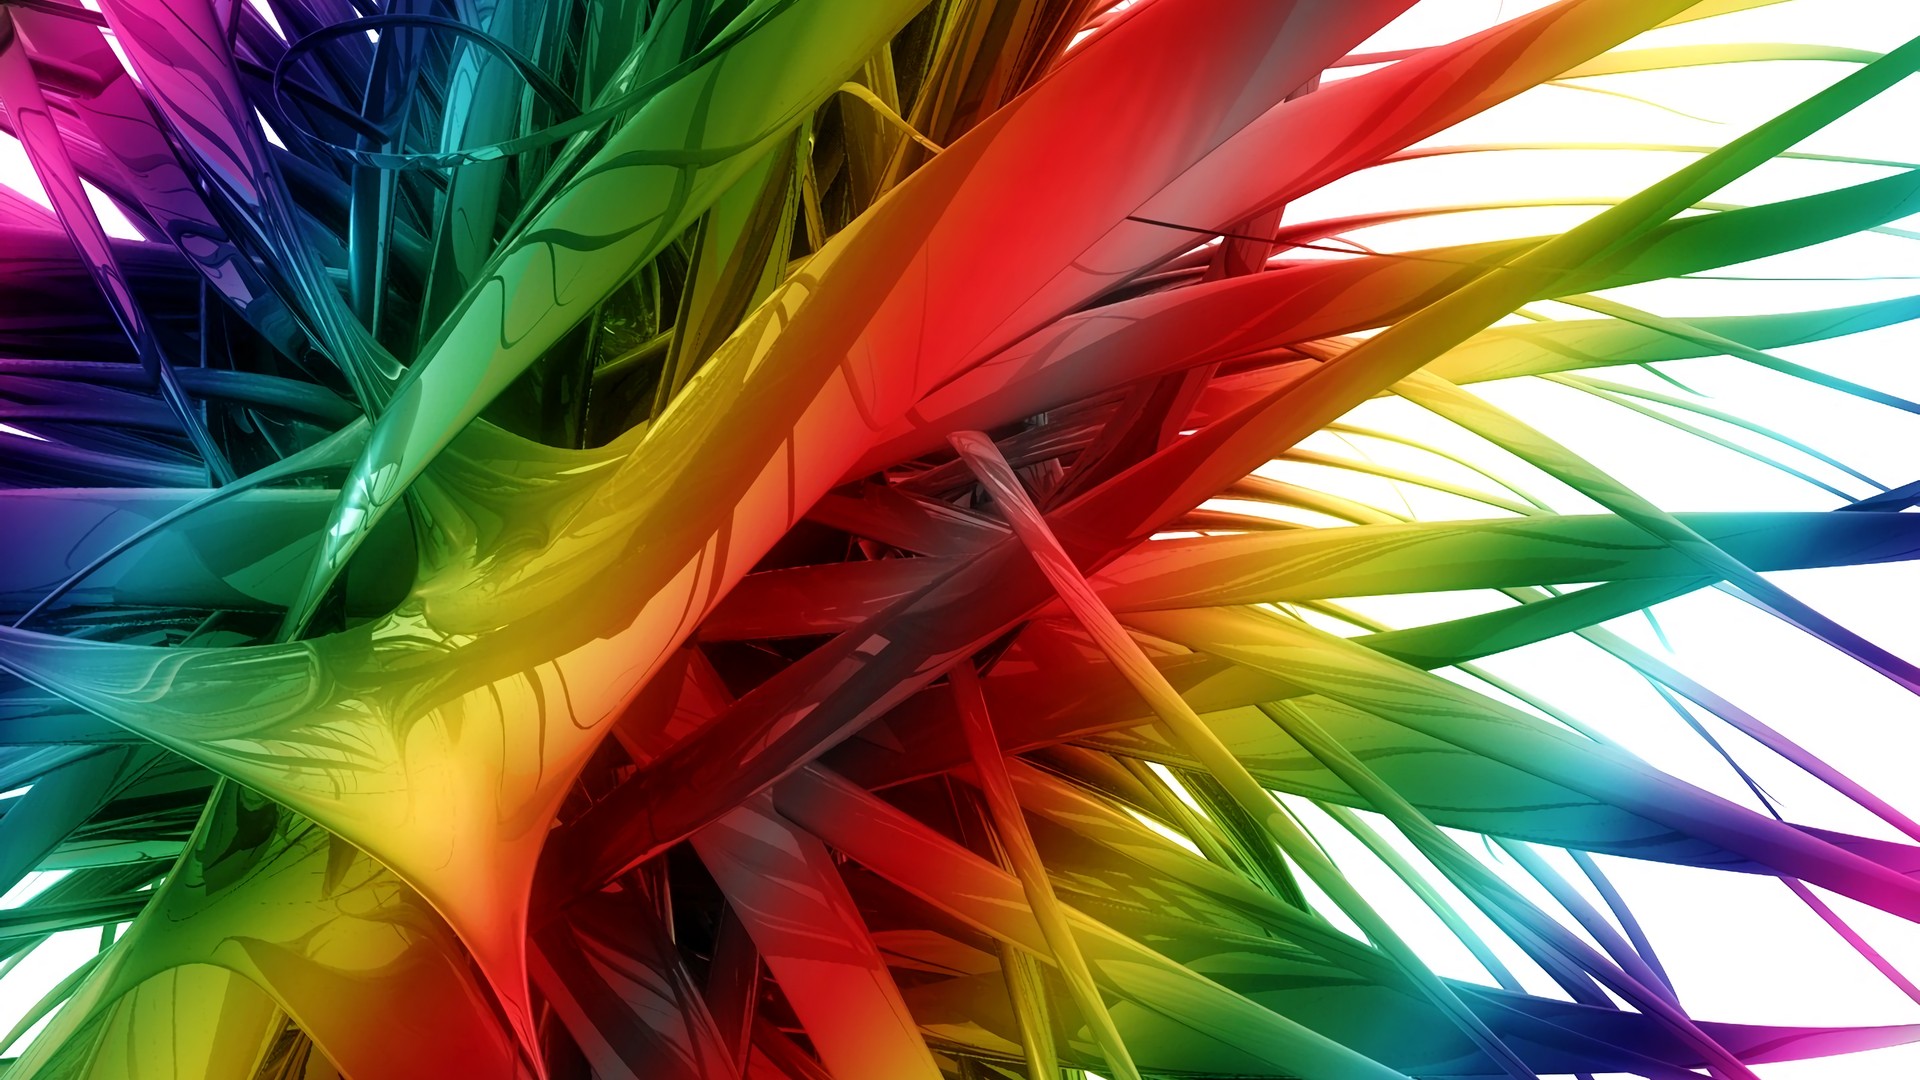 Rainbow Colors Wallpaper HD with image resolution 1920x1080 pixel. You can make this wallpaper for your Desktop Computer Backgrounds, Mac Wallpapers, Android Lock screen or iPhone Screensavers